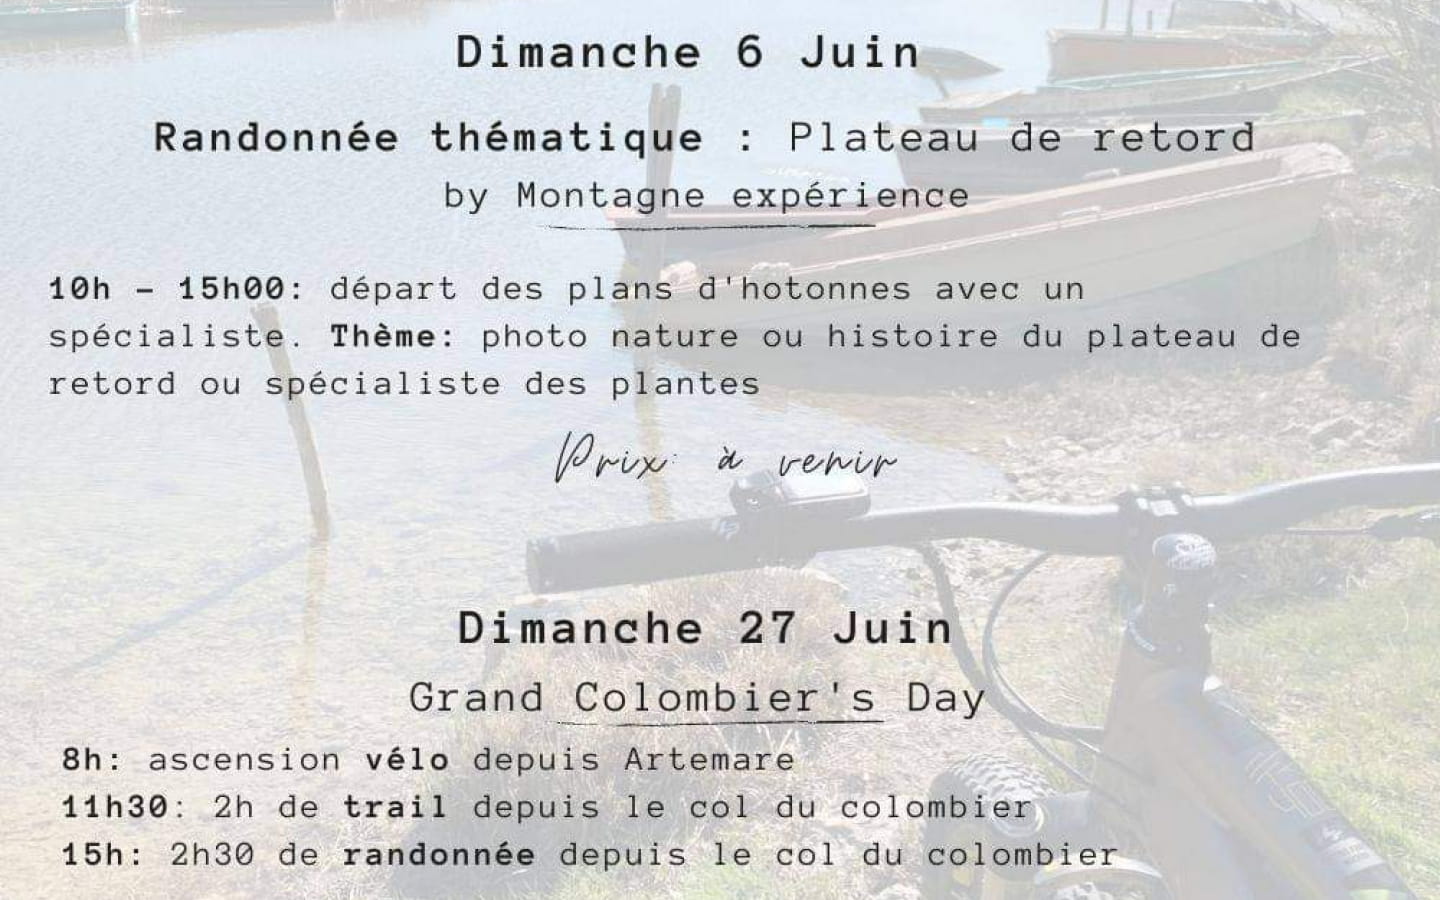 Grand Colombier's Day